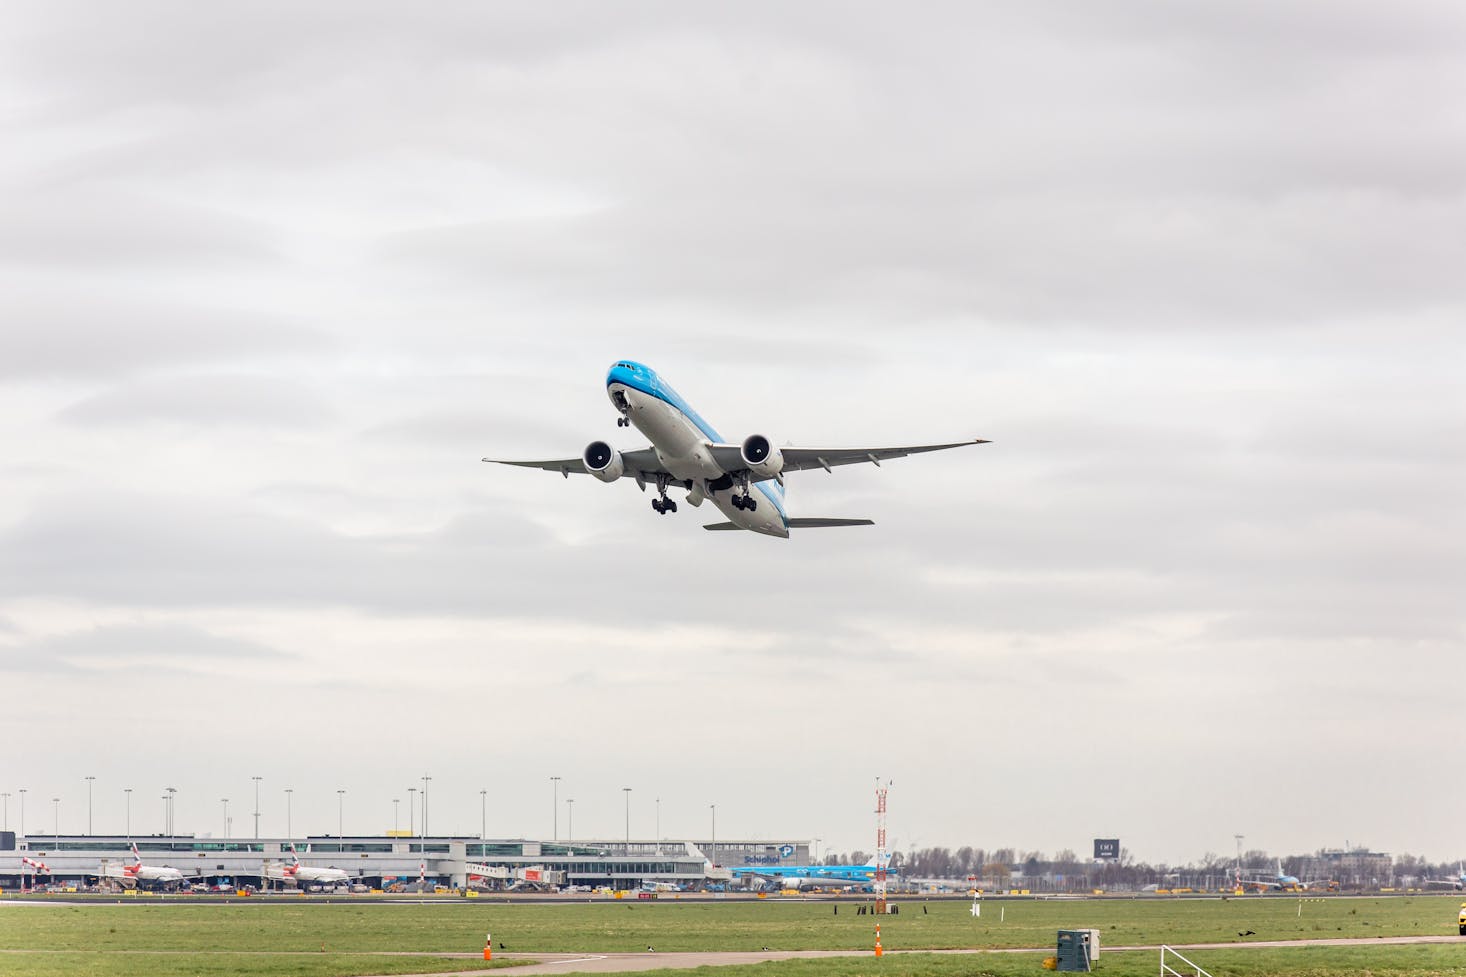 Plane taking off at Amsterdam airport